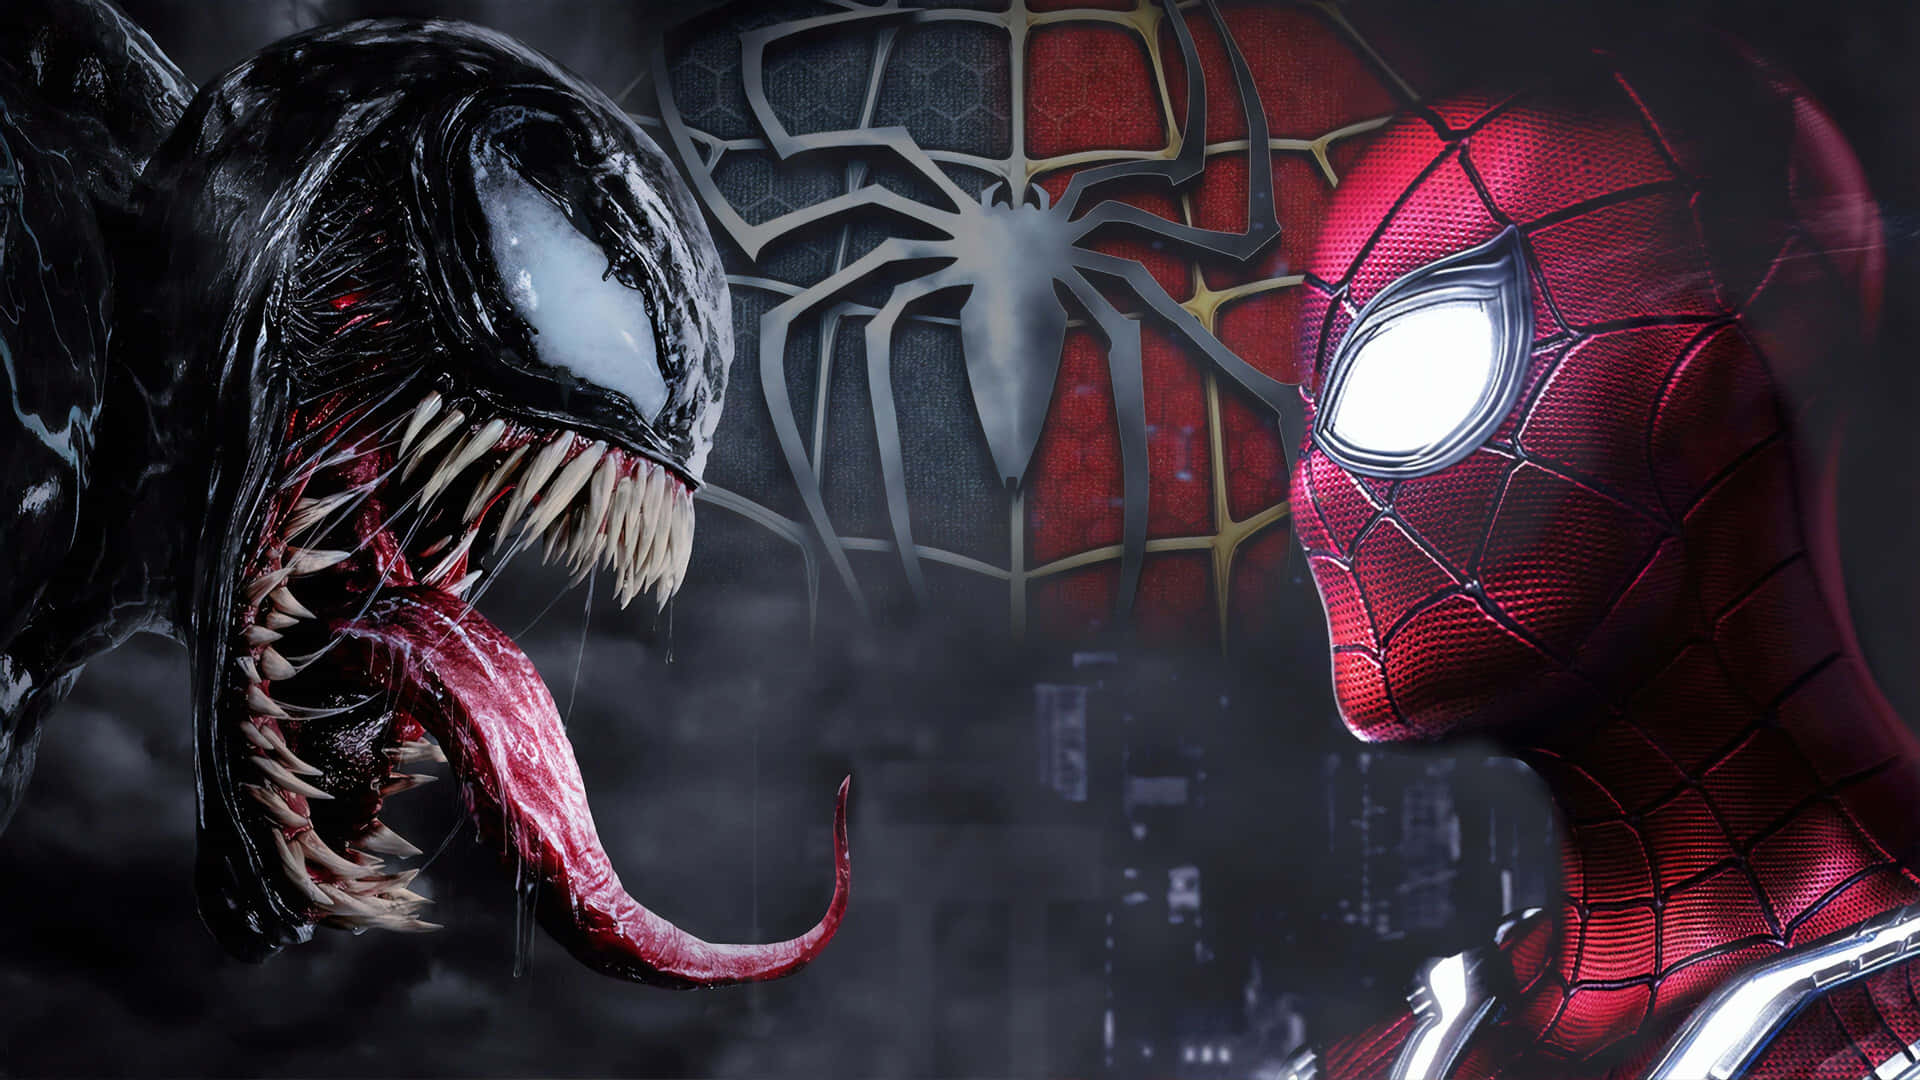 Venom and Spiderman face off in an epic battle! Wallpaper